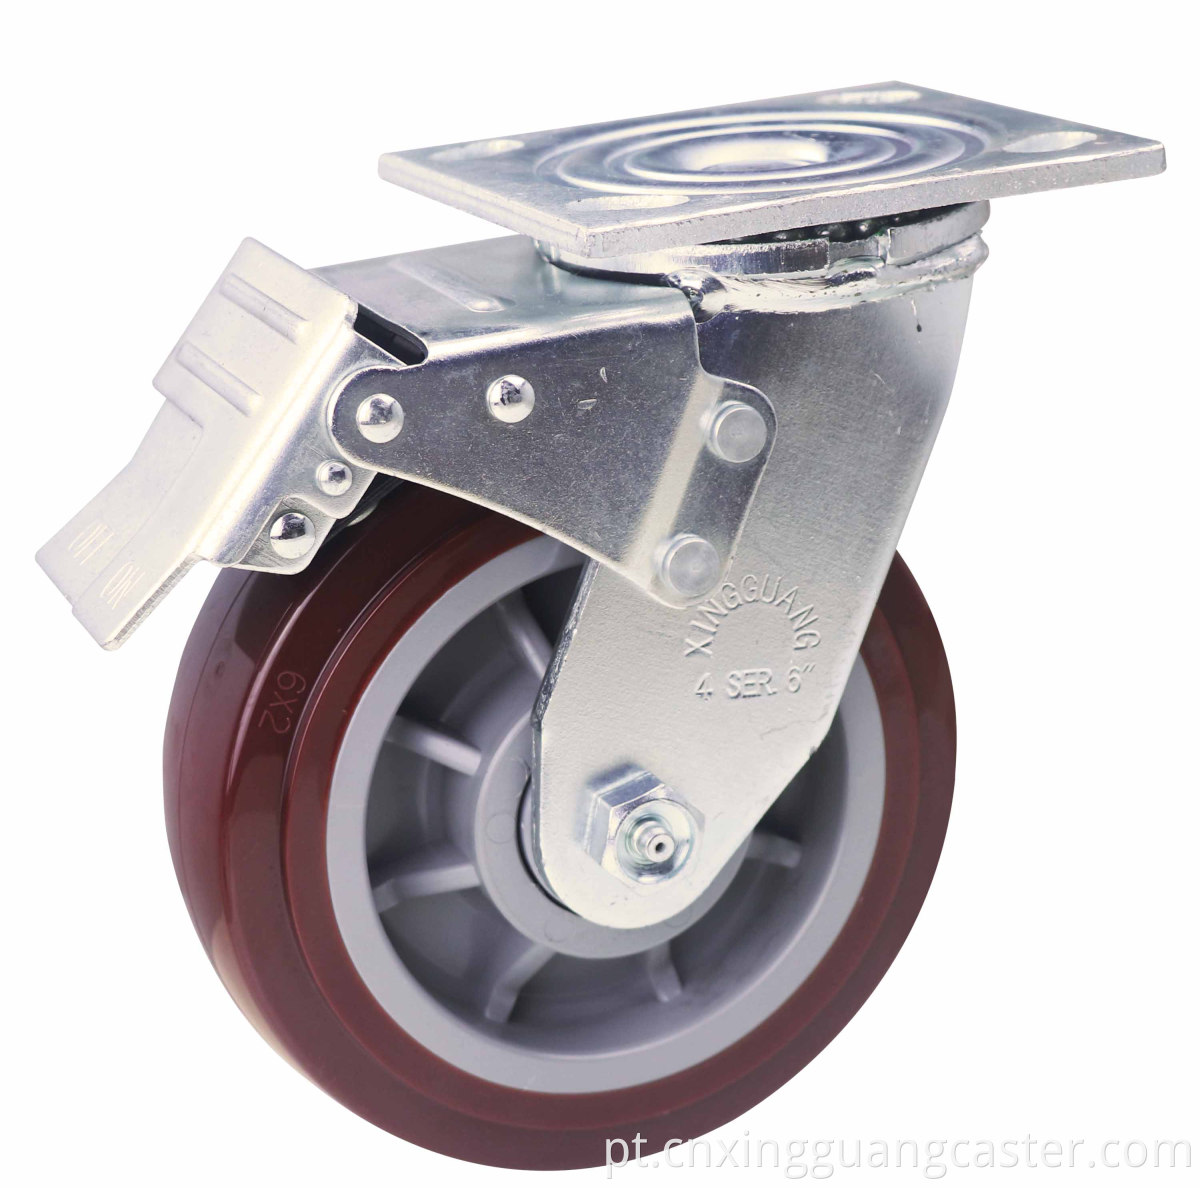 swivel caster wheels with brakes